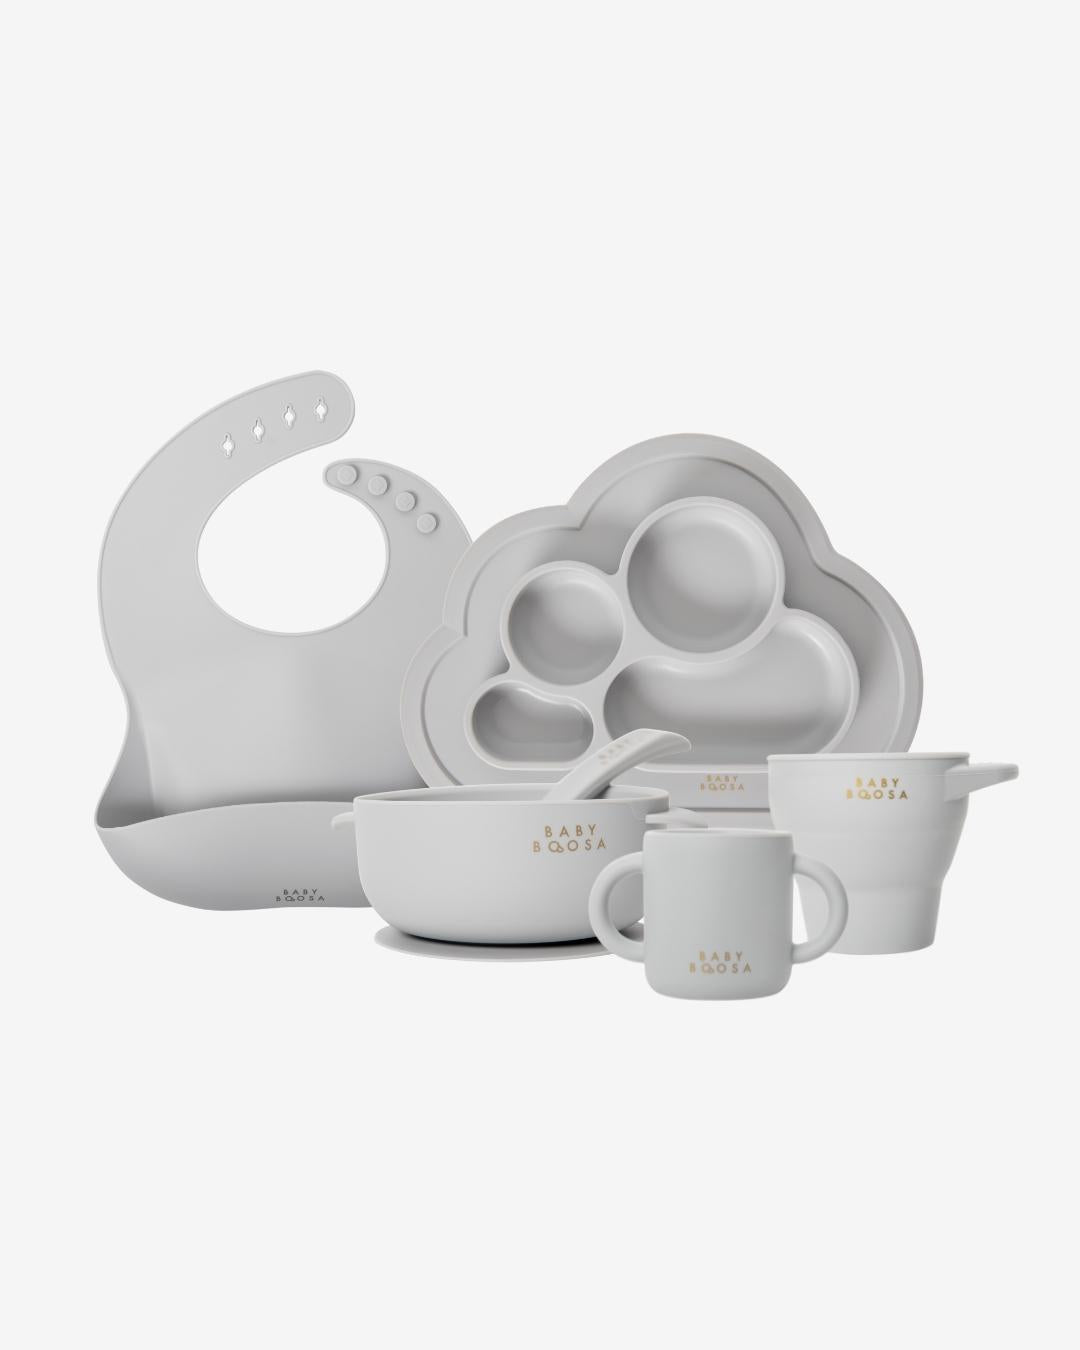 Weaning Gift Set | Luxe Silicone | All you need Essentials | Mess-Free | Grippy non-slip suction | Easy Clean | Dentist Developed (Concrete Grey) - £80 Value